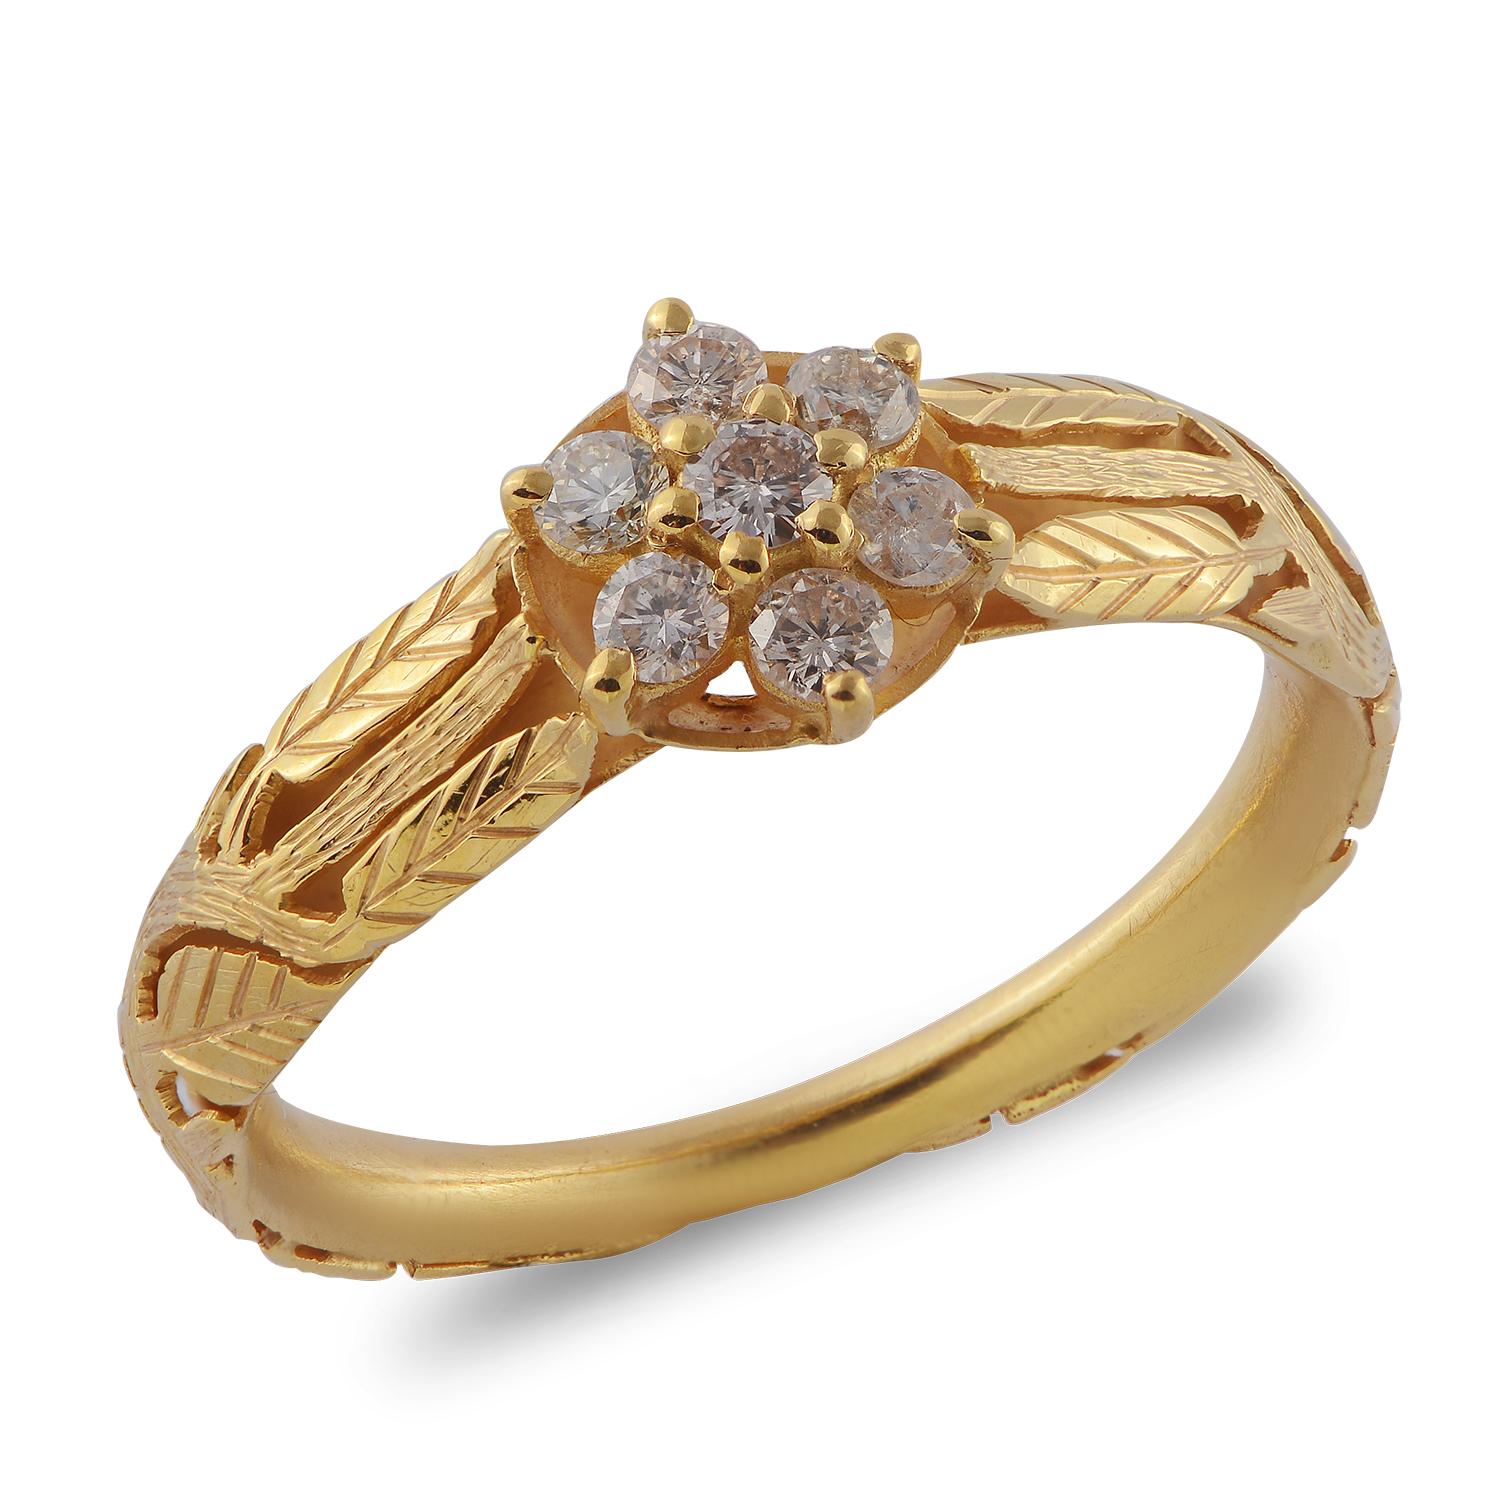 Diamond Cluster 18 Karat Gold Ring.


This divine diamond ring has been handmade in our workshops. It is made in 18k gold and is embedded with full cut diamonds. The shank has exquisite 
hand -engraving work on it using botanical motifs.

The ring